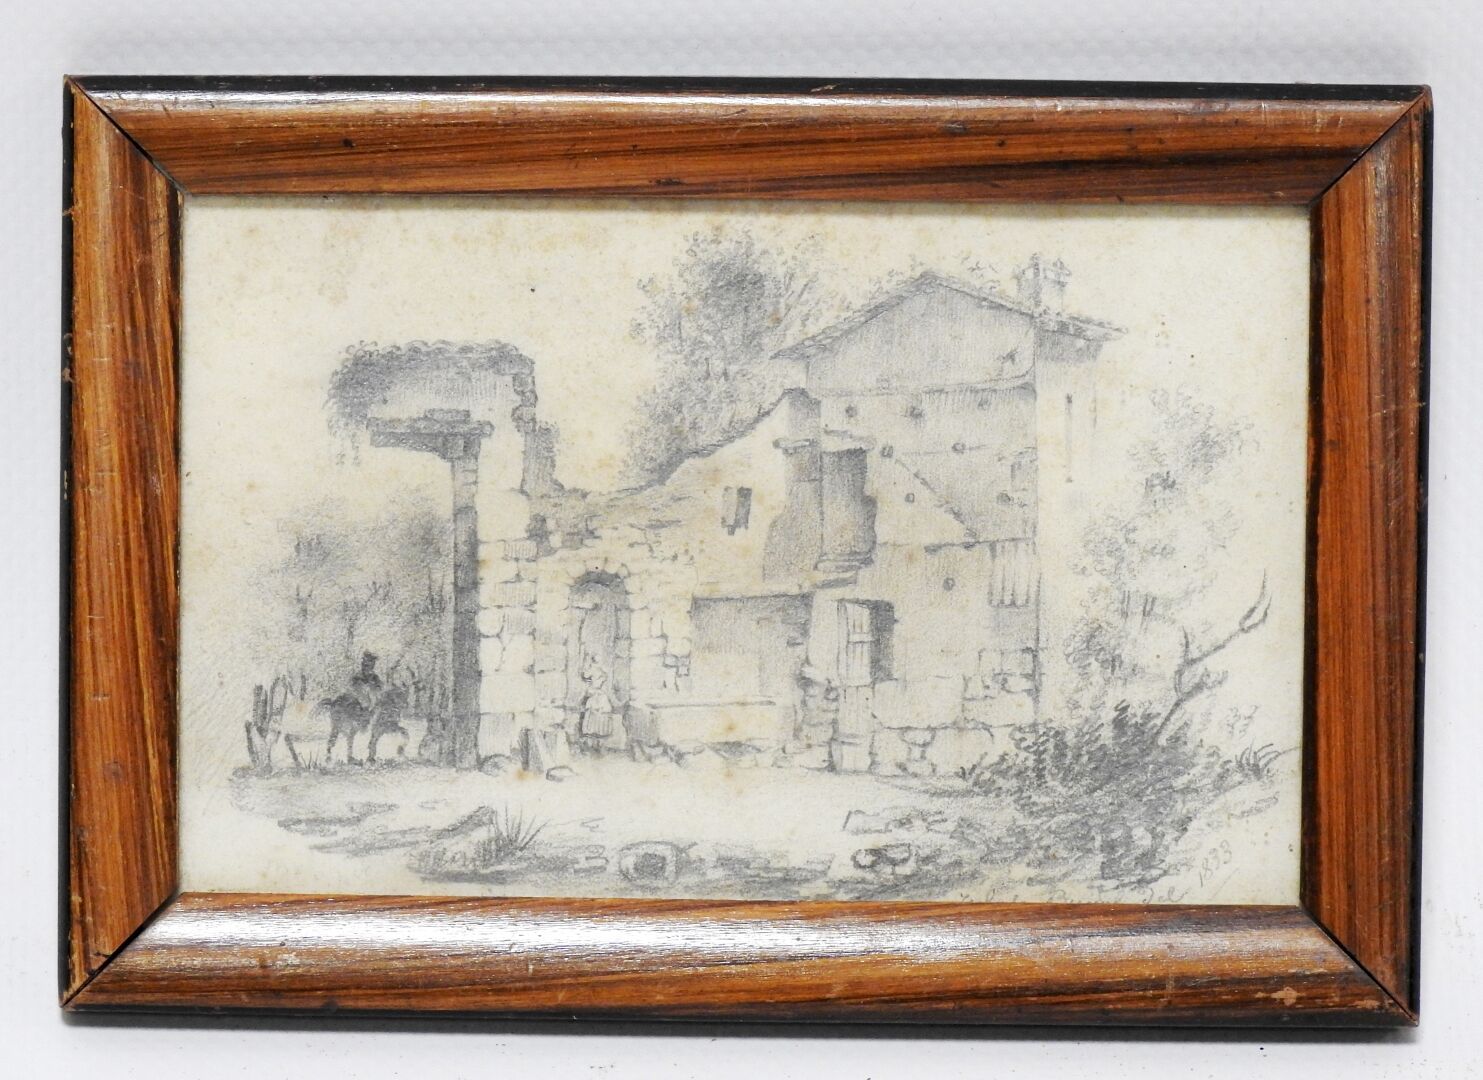 Null Jules BUVAL - XIXth century
Ruin.
Lead pencil. Signed and dated 1833 in the&hellip;